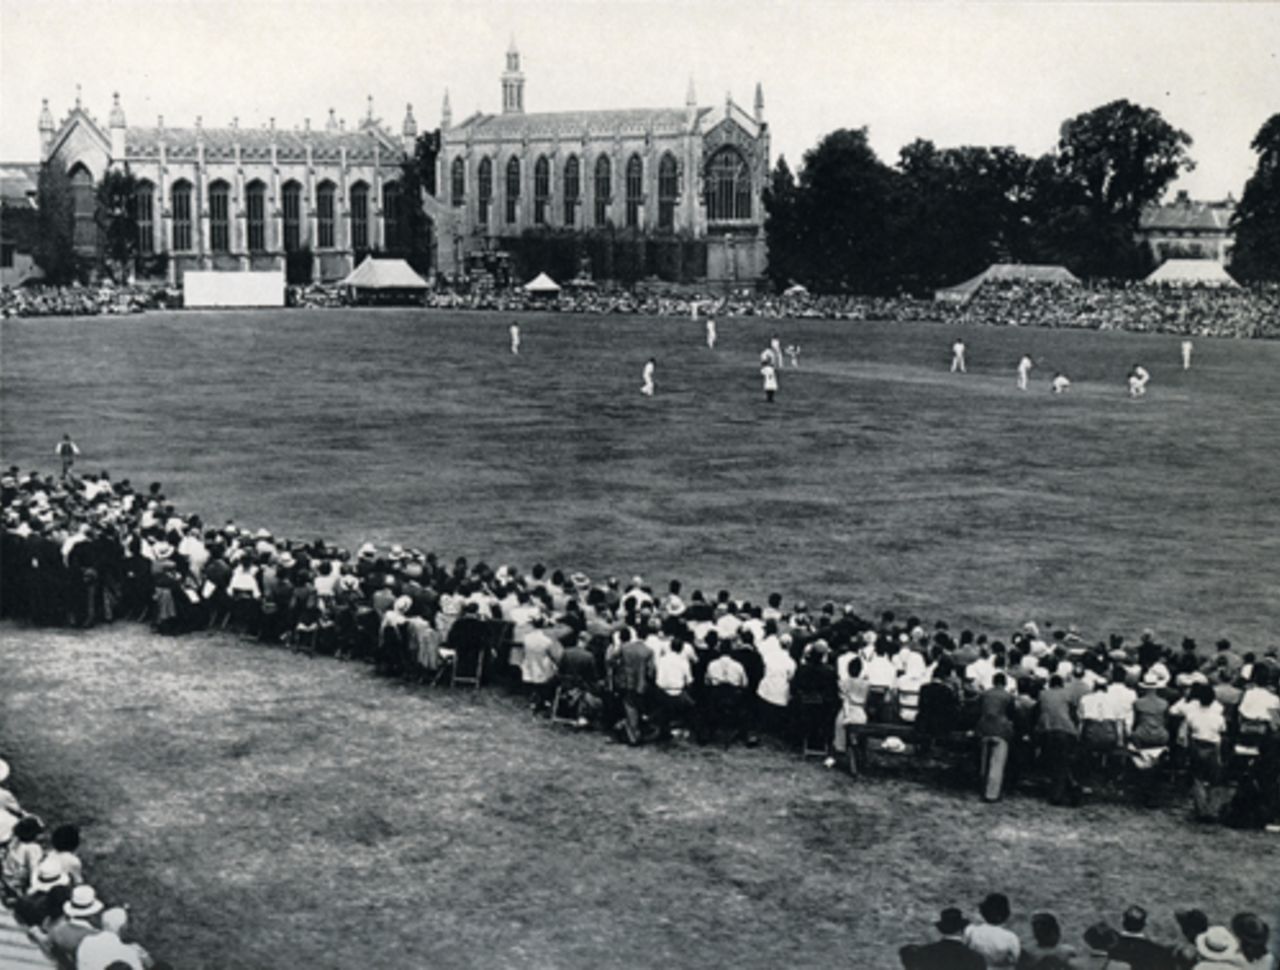 A full house at Cheltenham - 14000 inside and more locked out for the Championship decider, Gloucestershire v Middlesex, Cheltenham, August 16, 1947